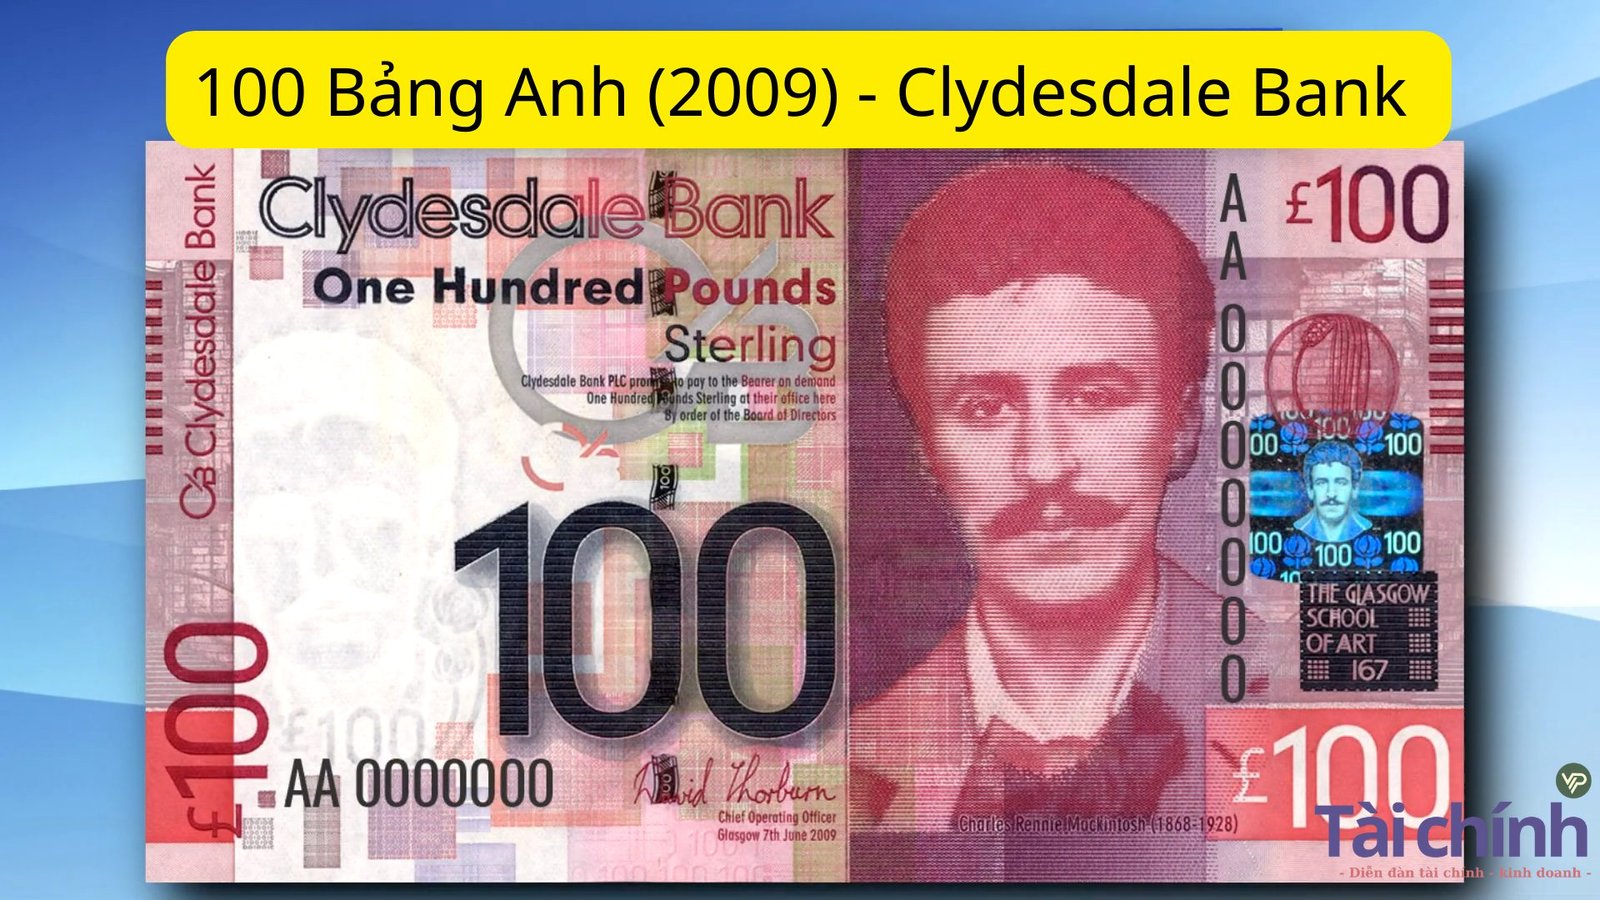 100 Bảng Anh (2009) - Clydesdale Bank